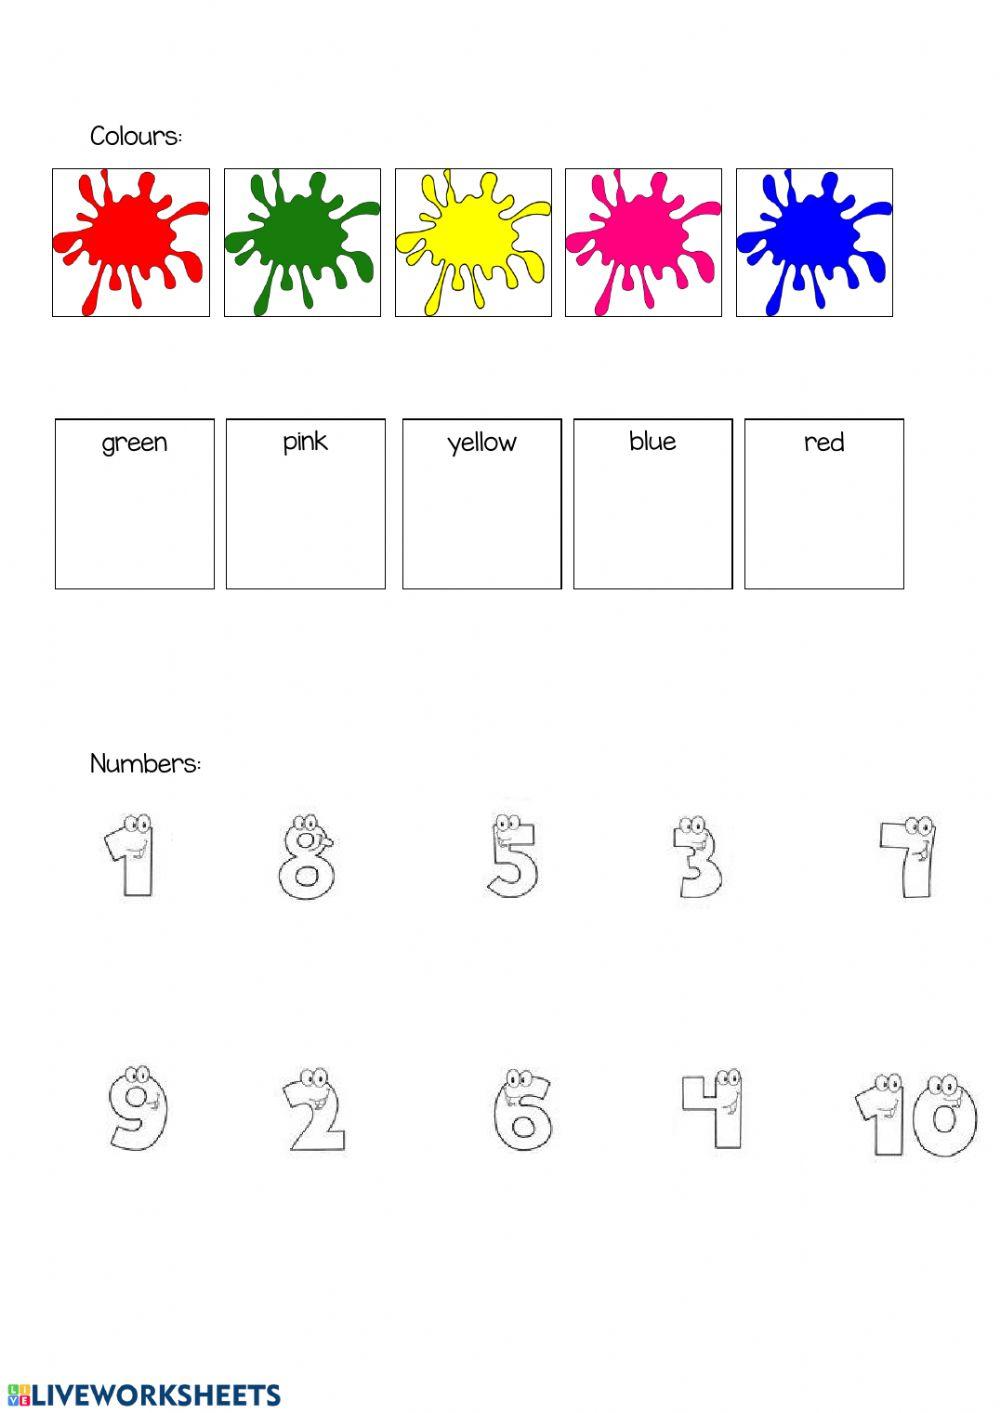 Vocabulary & Colours &Numbers